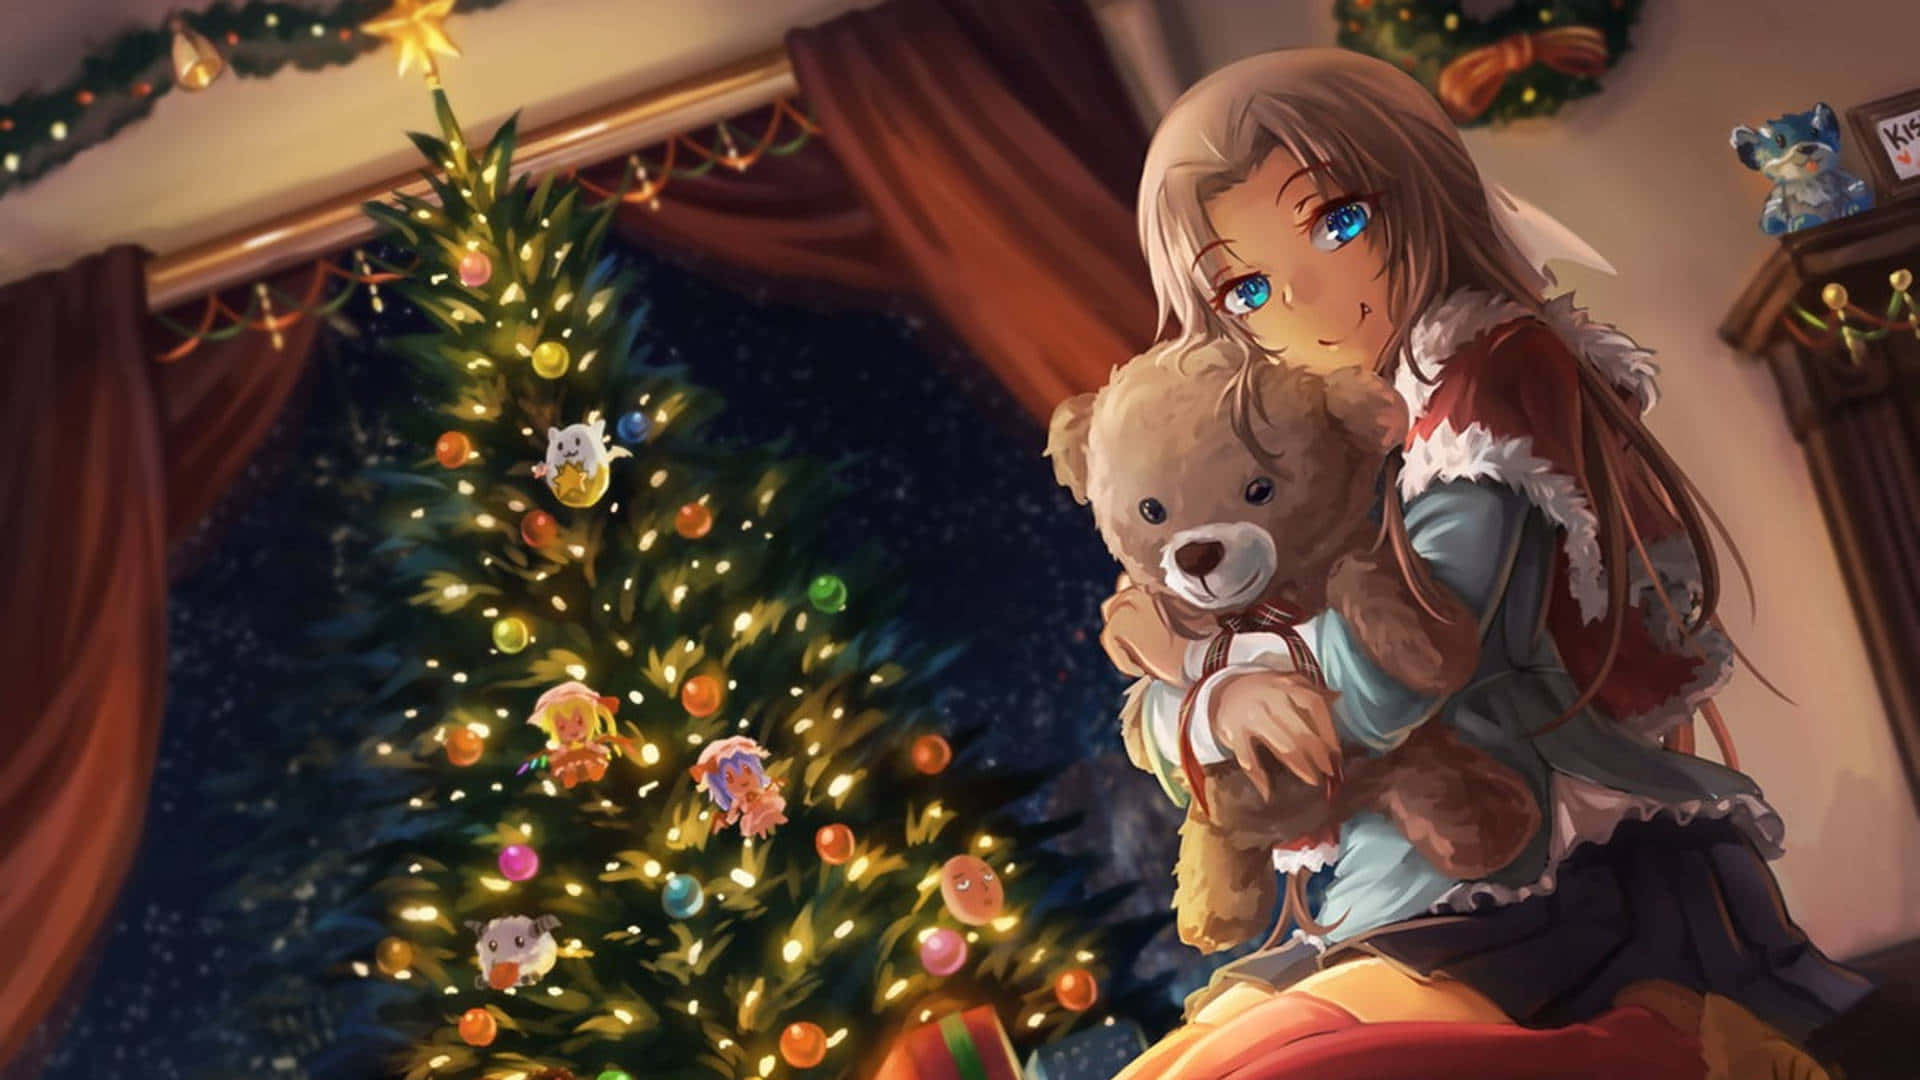 A festive Anime Christmas background with snow-capped tree and adorable characters celebrating the holiday.